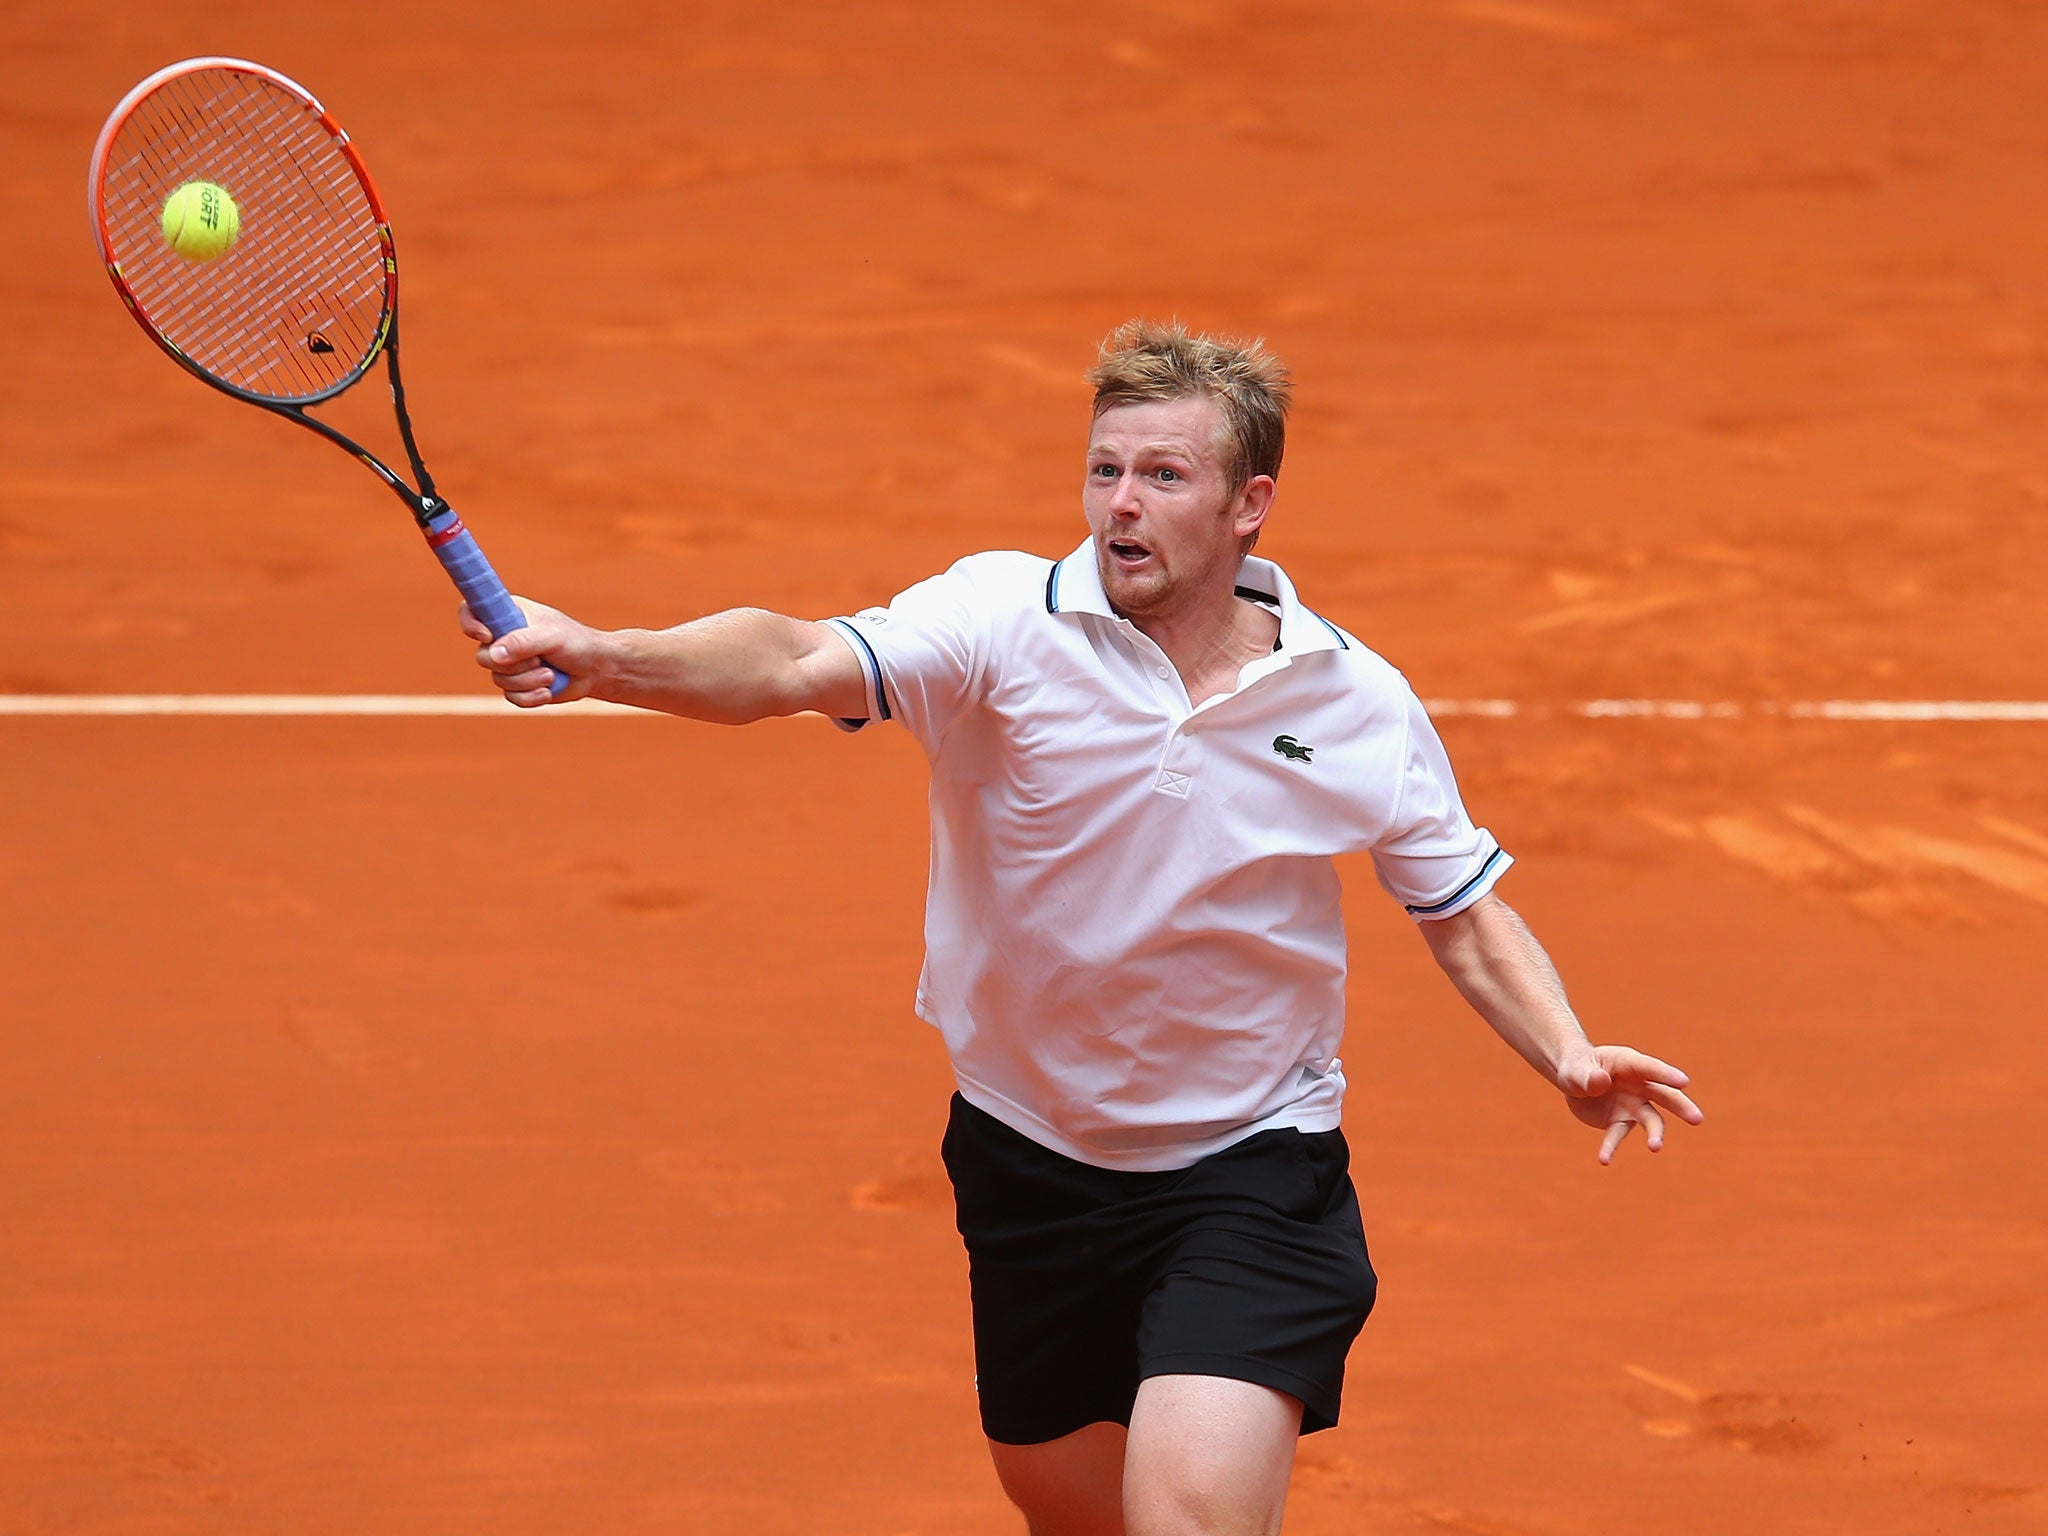 Andrey Golubev plays a volley at the Madrid Open earlier this month